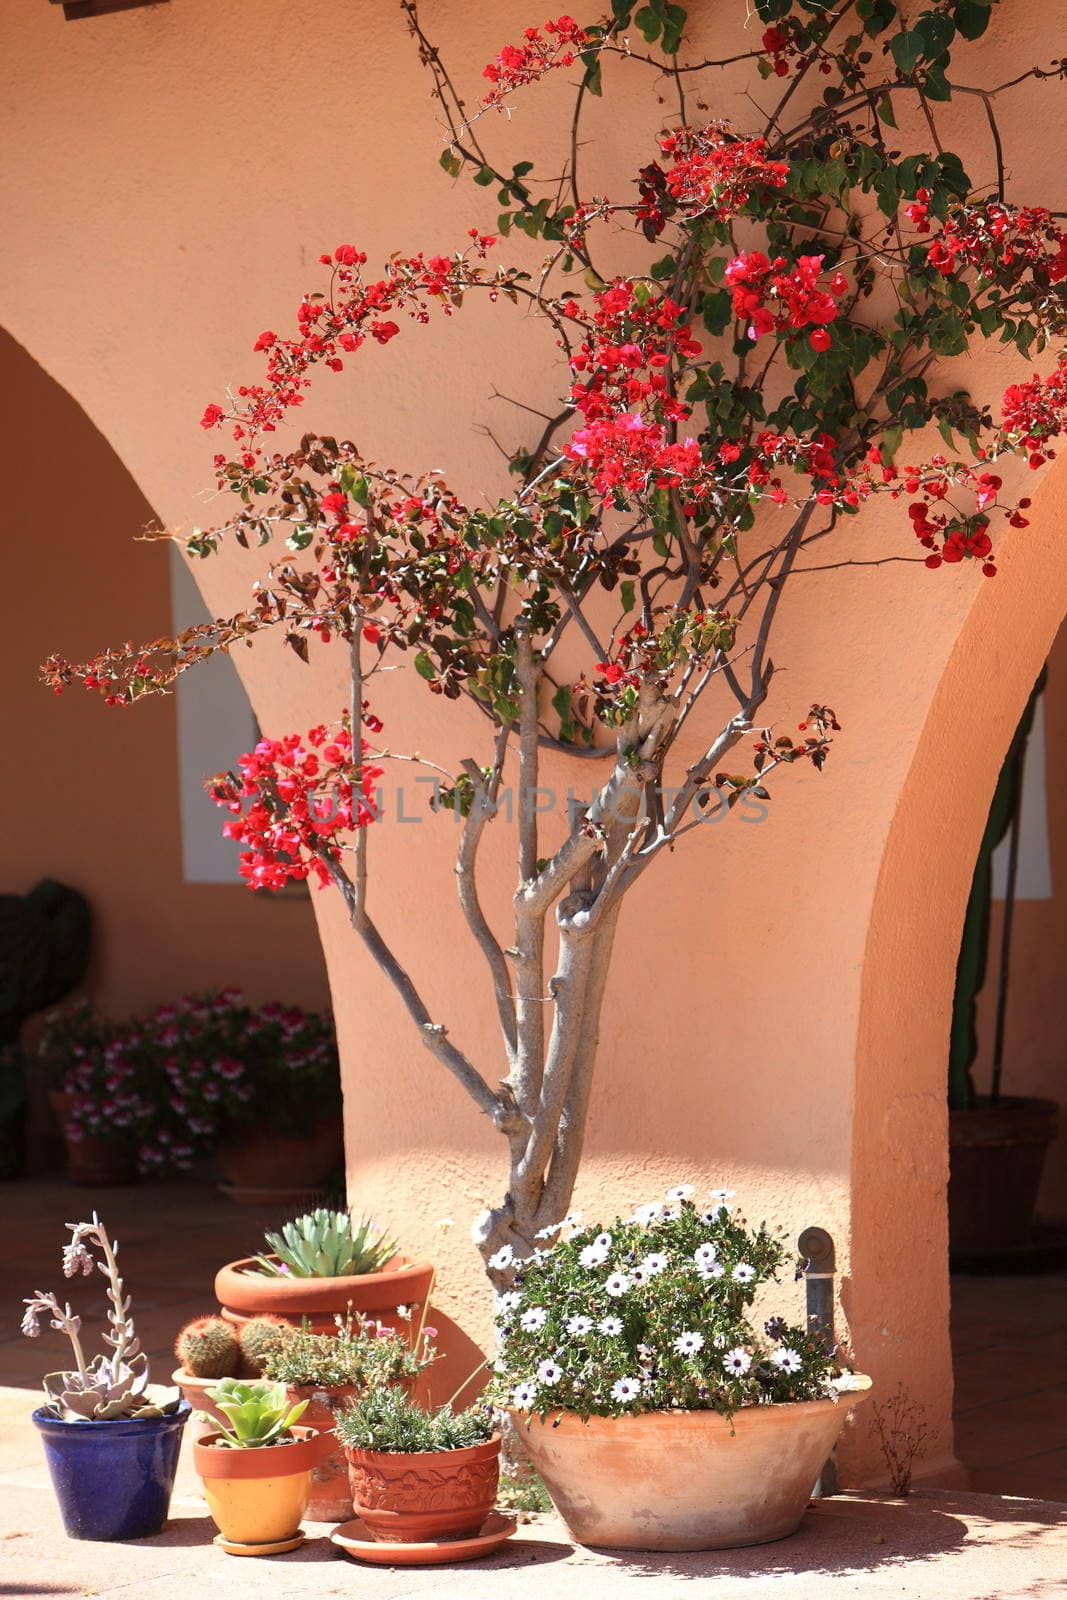 Details of a southern home with red bougainvilleas